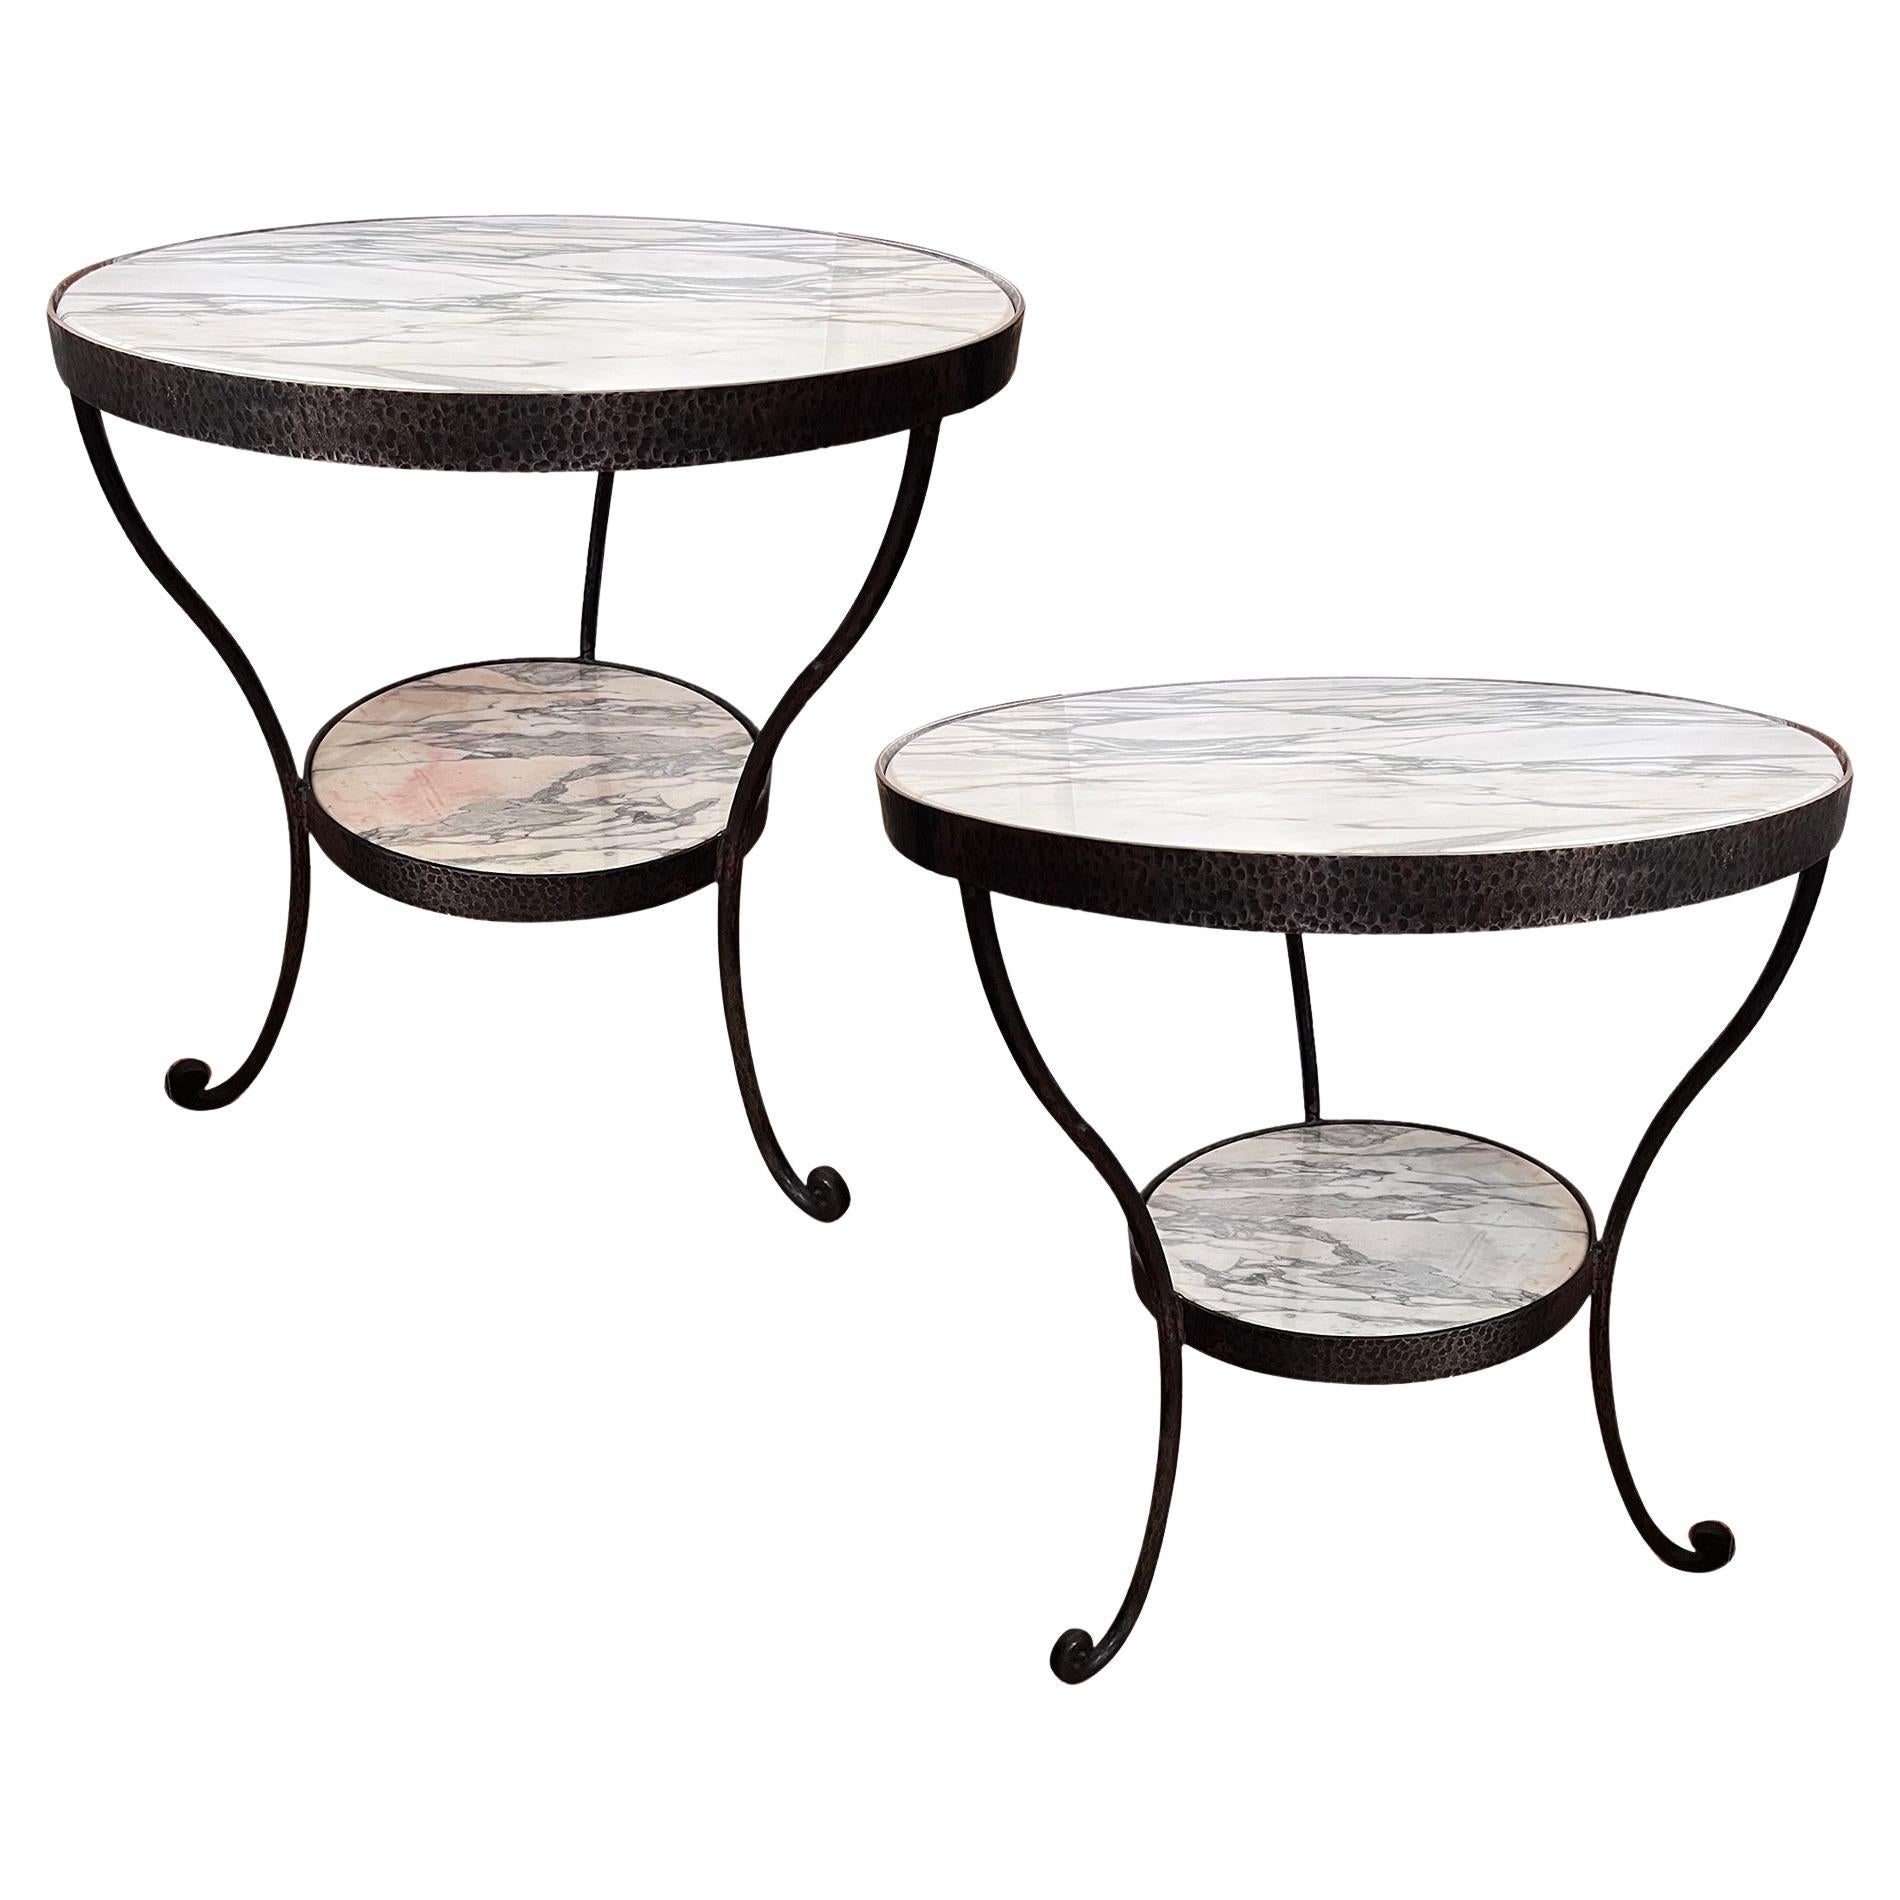 Pair of Italian Marble Side Tables